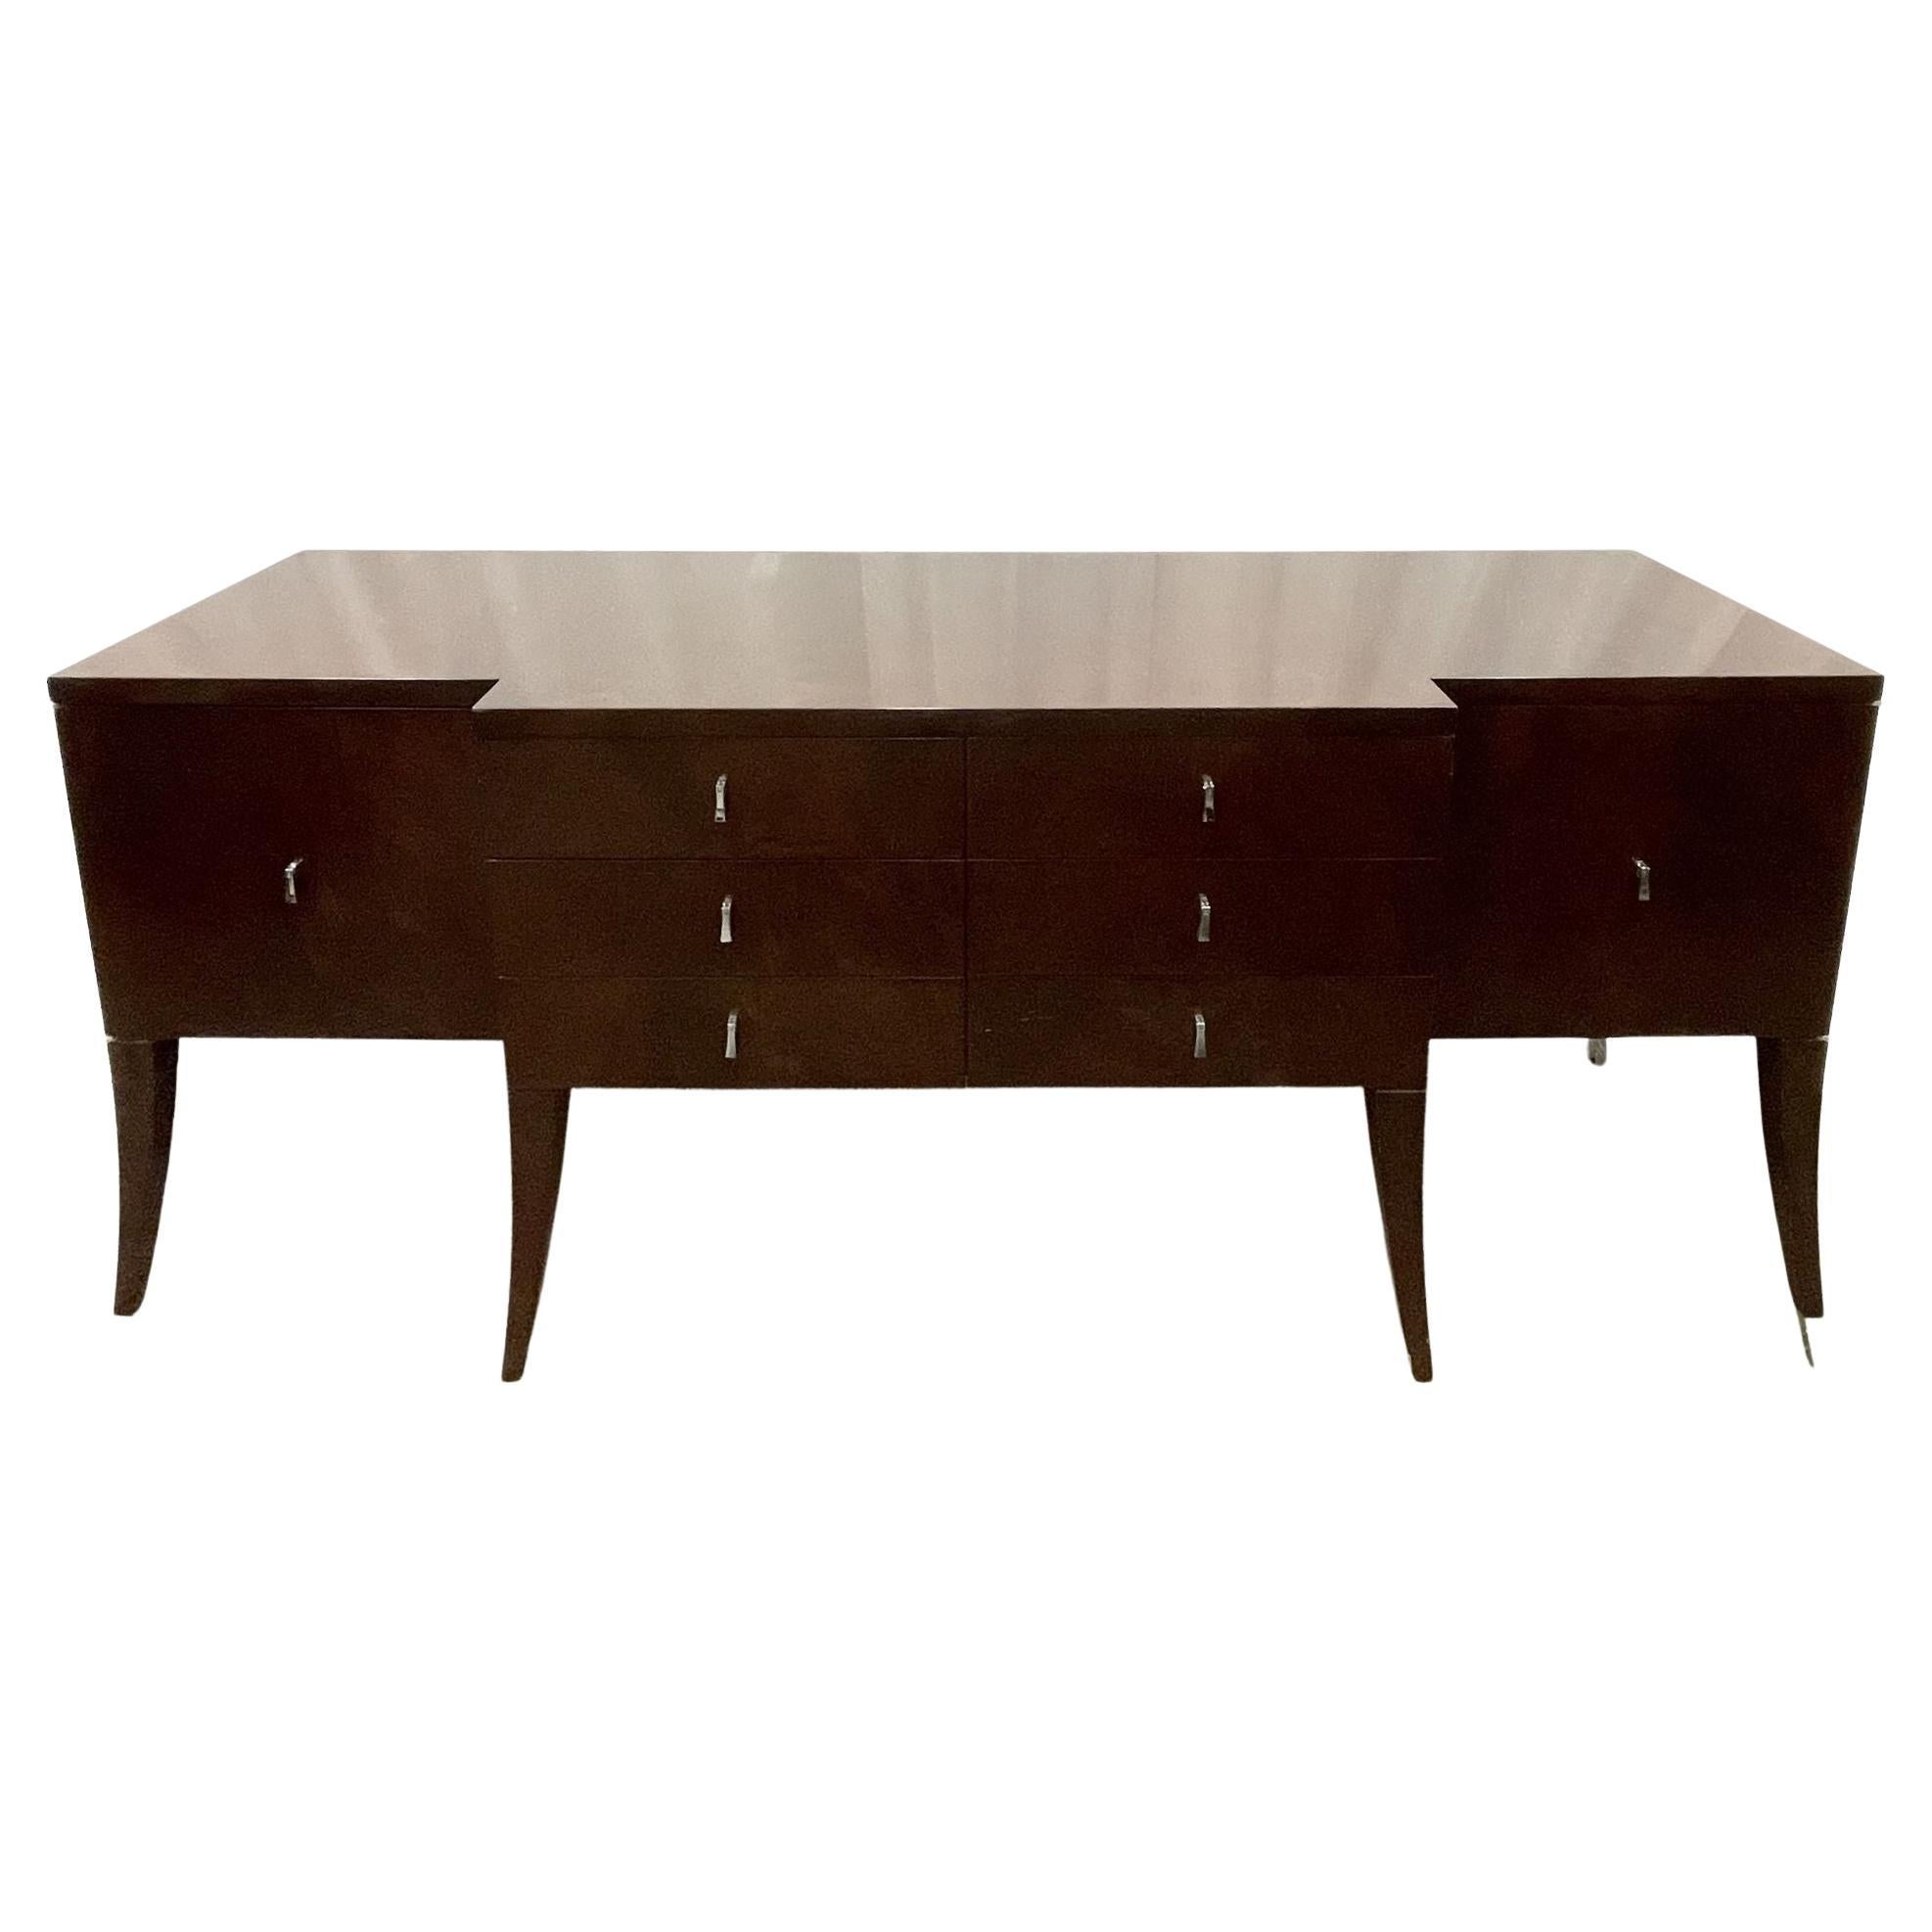 Flame Mahogany Sideboard, Buffet or Credenza by Decca for Bolier